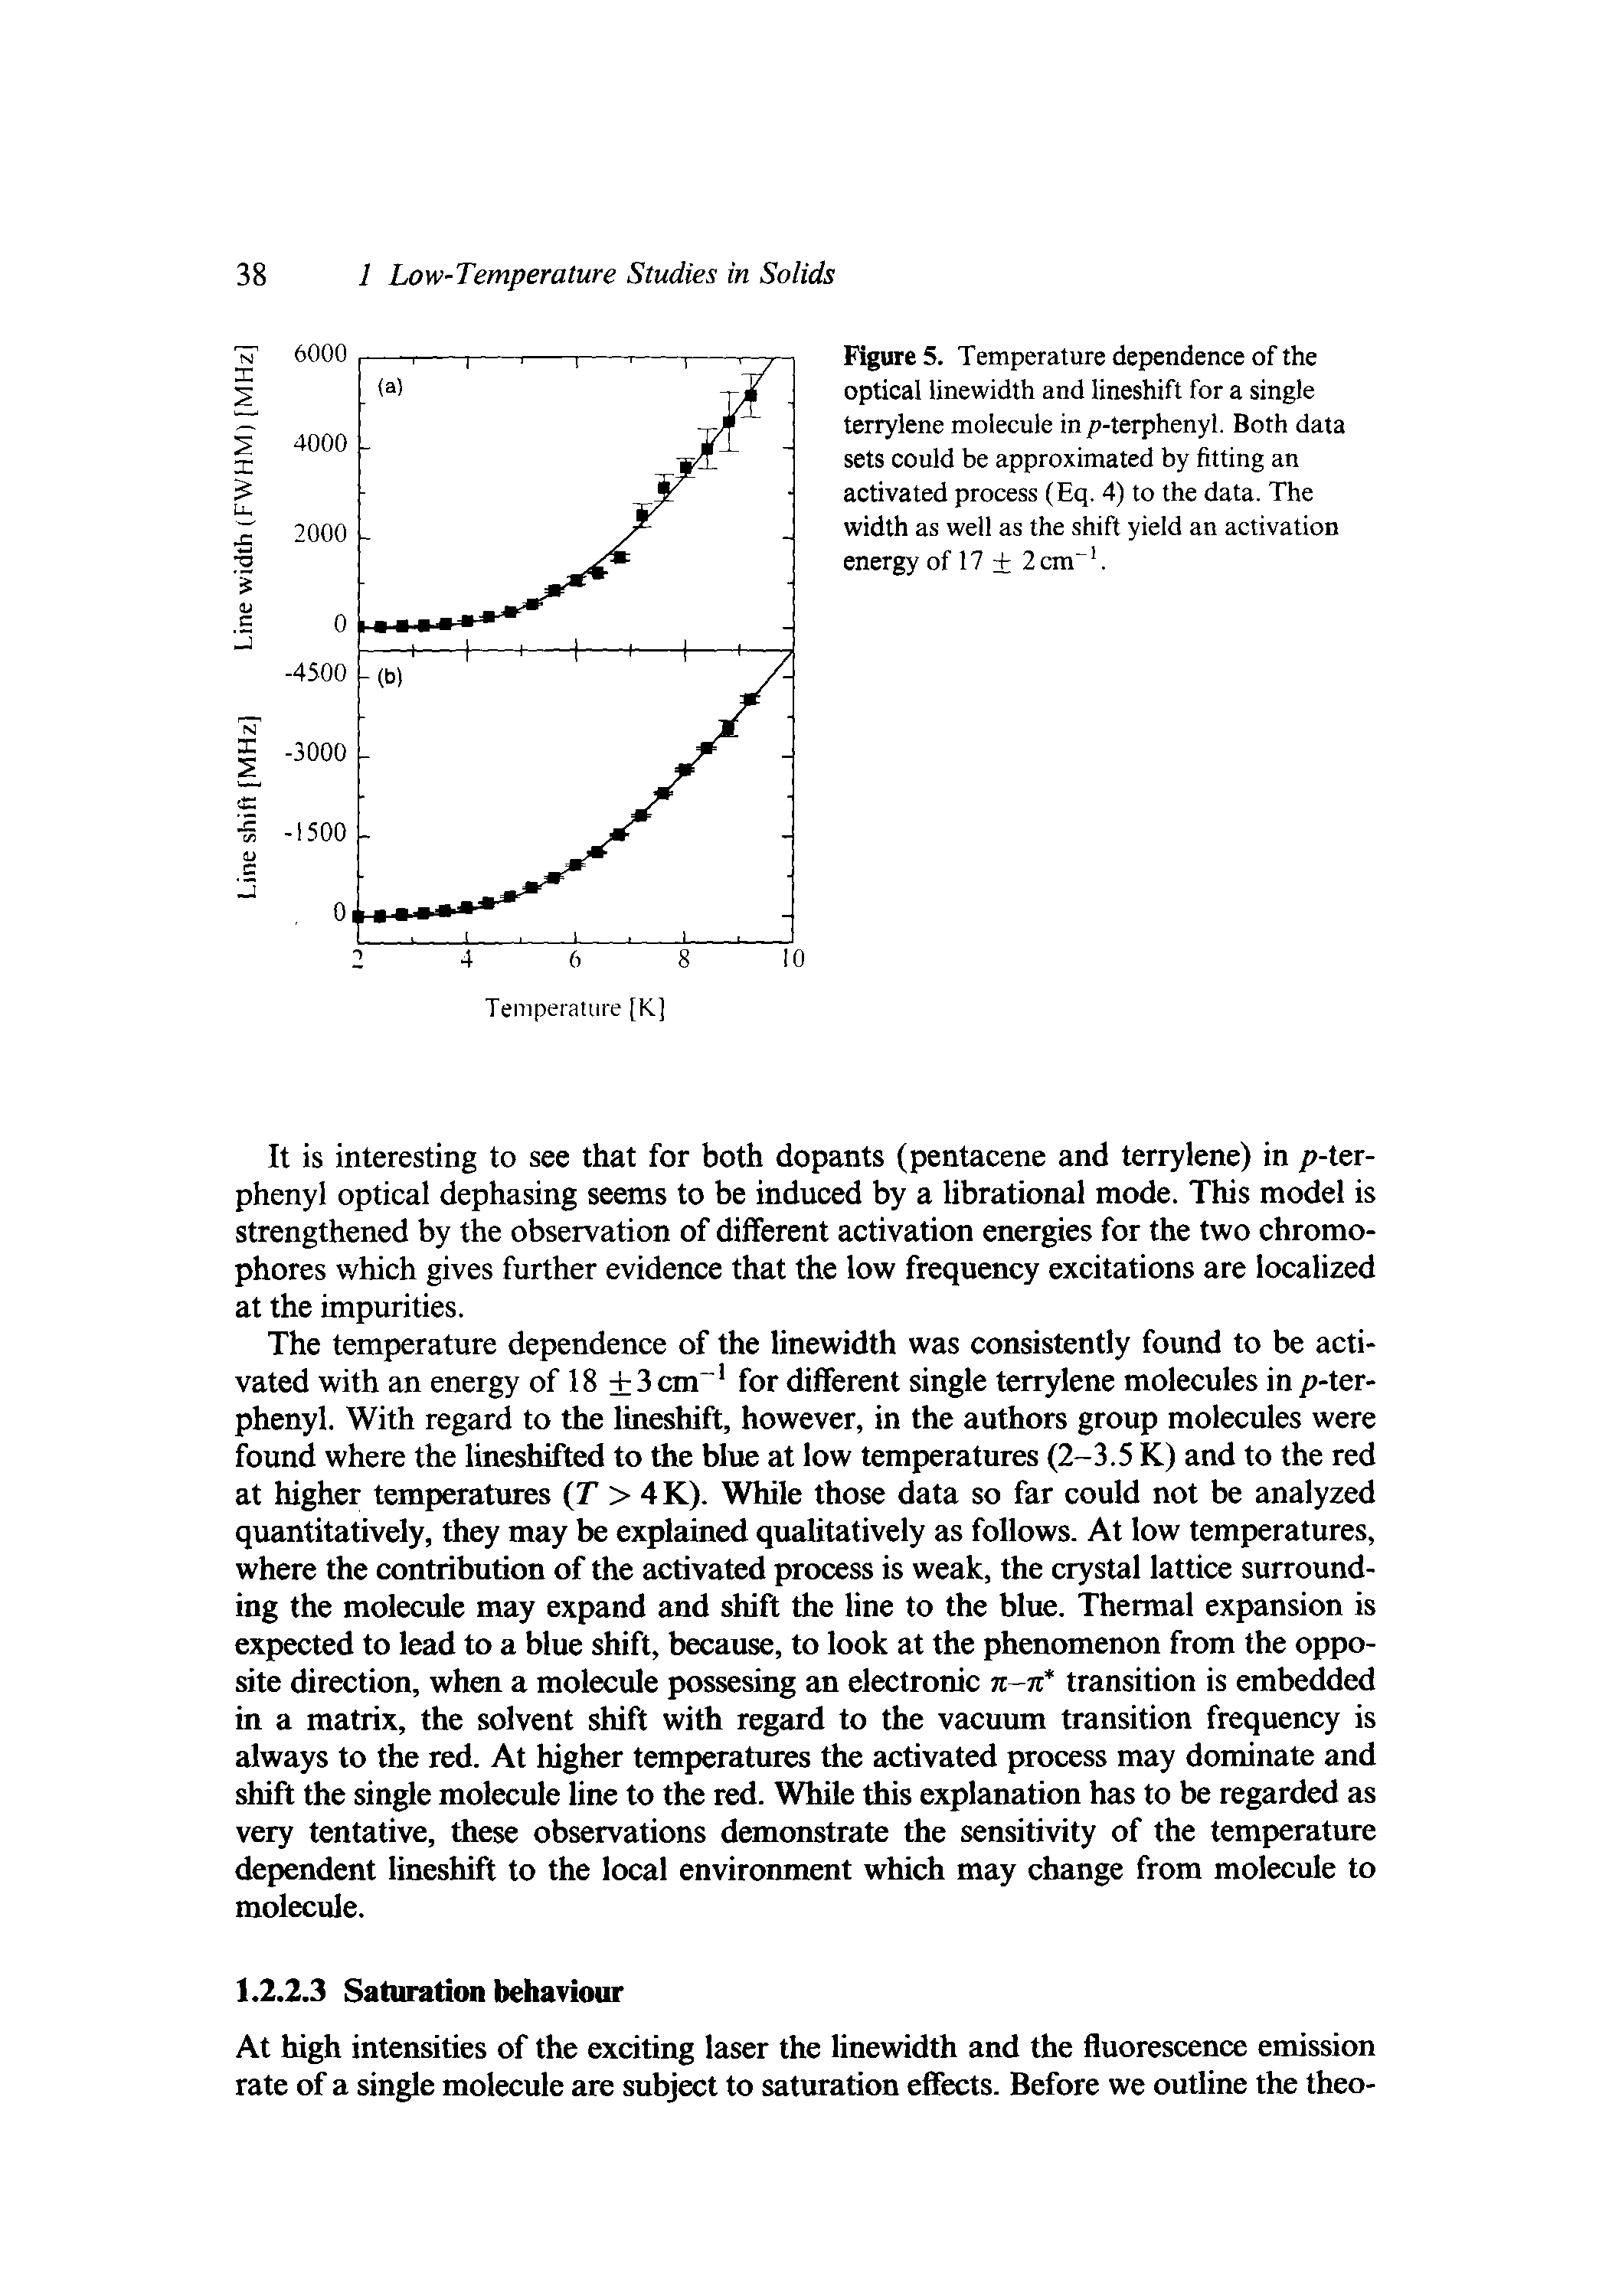 Figure 5. Temperature dependence of the optical linewidth and lineshift for a single terrylene molecule in p-terphenyl. Both data sets could be approximated by fitting an activated process (Eq. 4) to the data. The width as well as the shift yield an activation energy of 17 2cm. ...